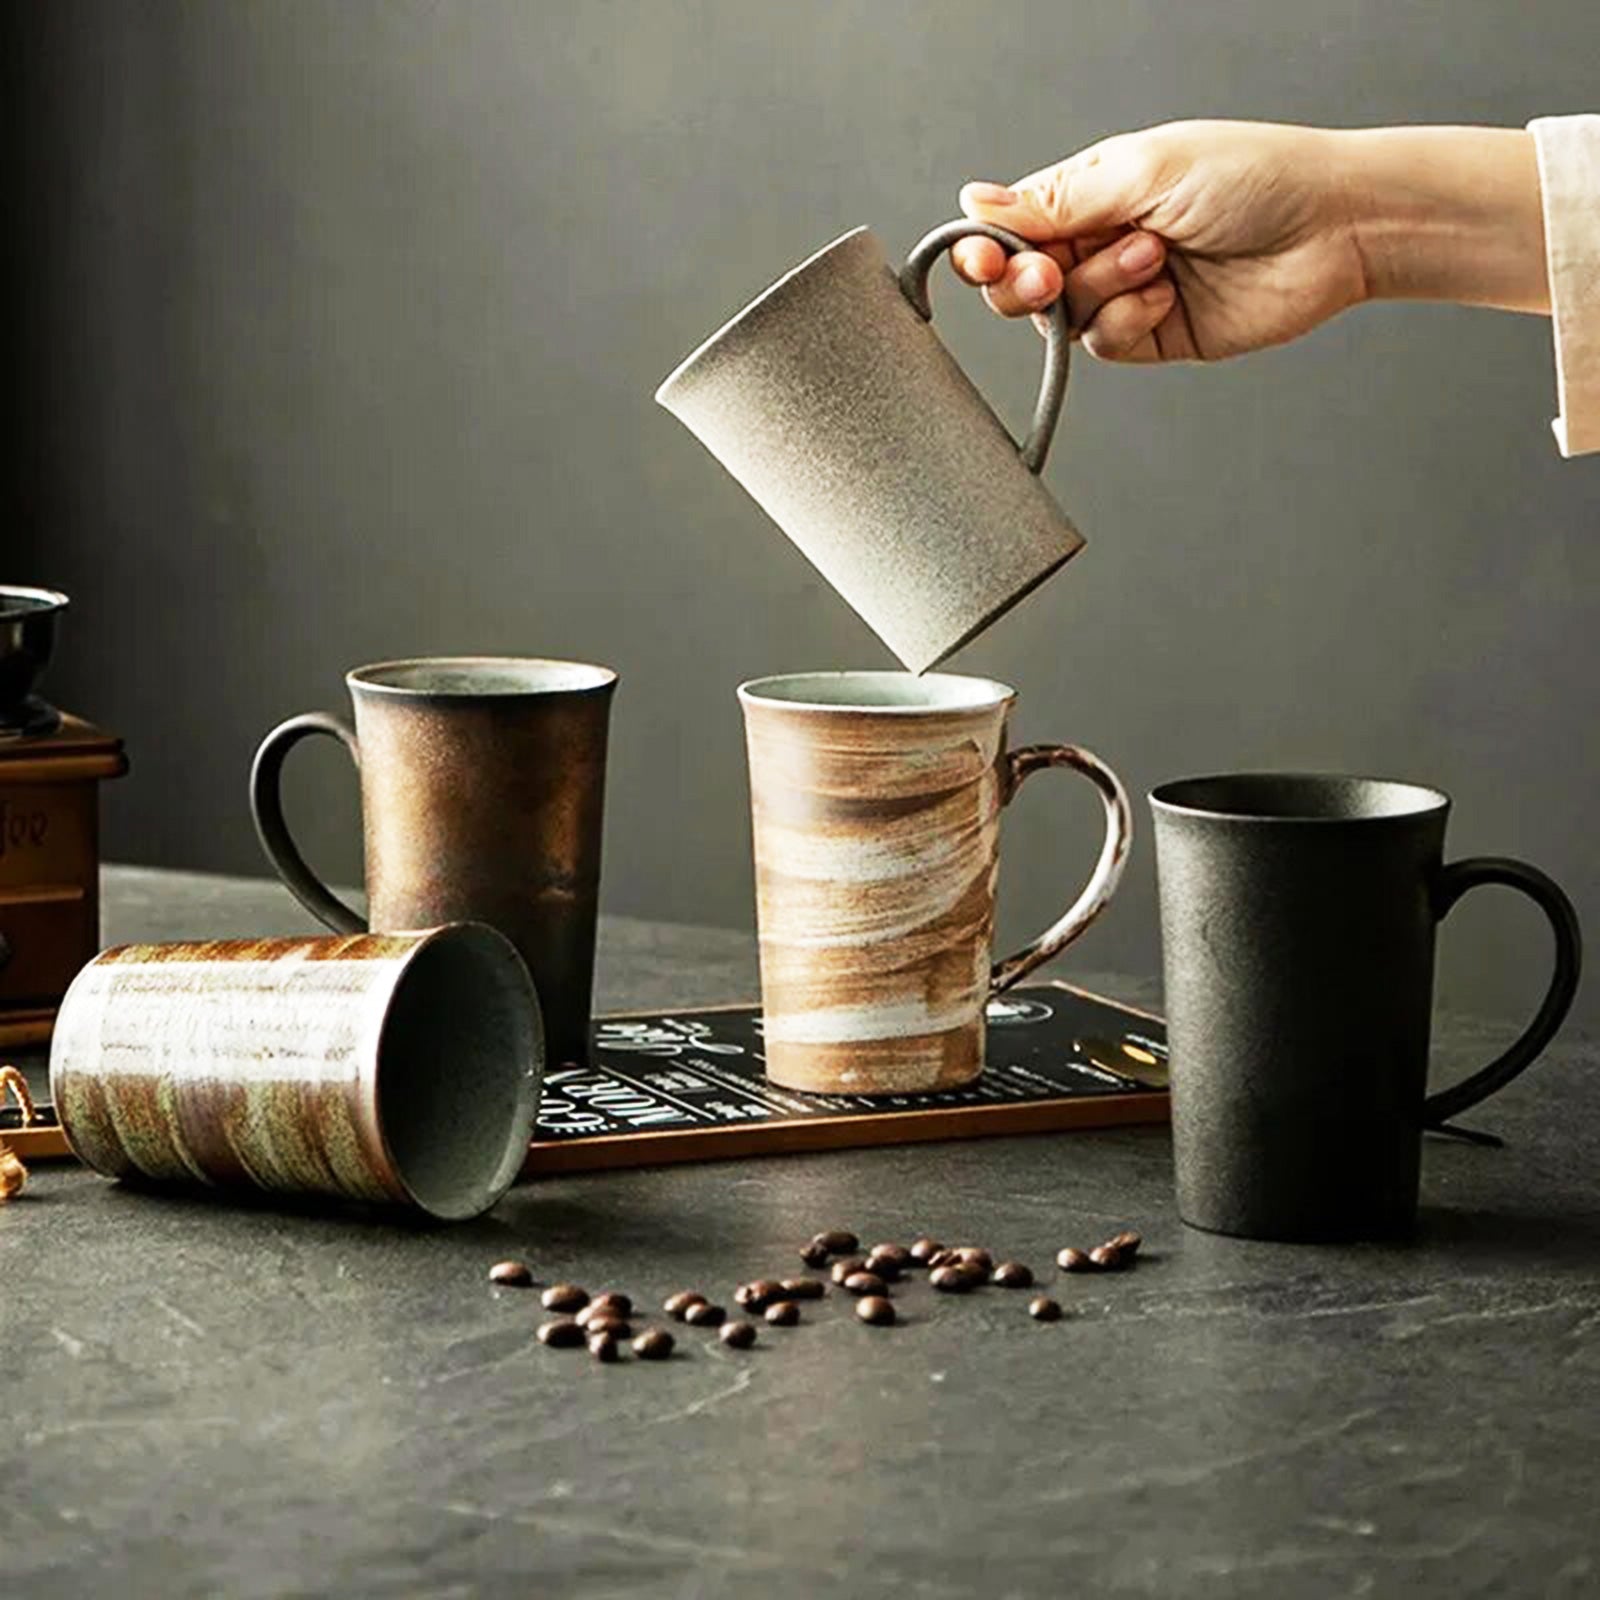 Elegant Retro Coffee Mugs with Artistic Touch